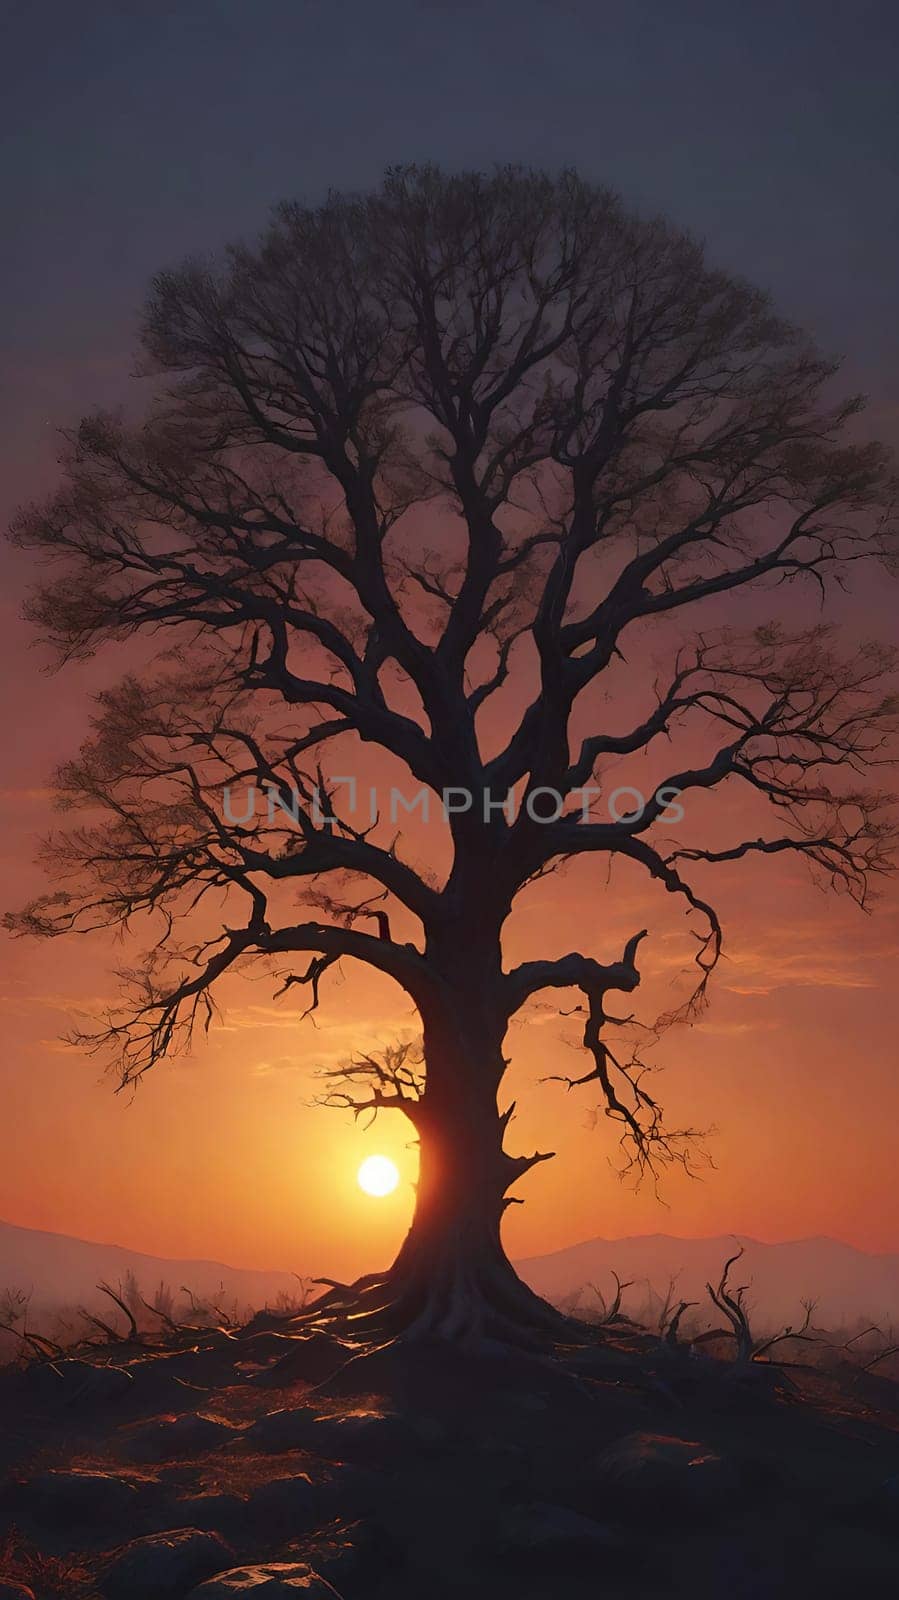 Beautiful tree in the forest at sunset, 3d rendering. Computer digital drawing.Foggy landscape with old oak tree at sunrise in the forest.Beautiful oak tree in the fog at sunset. Nature composition.